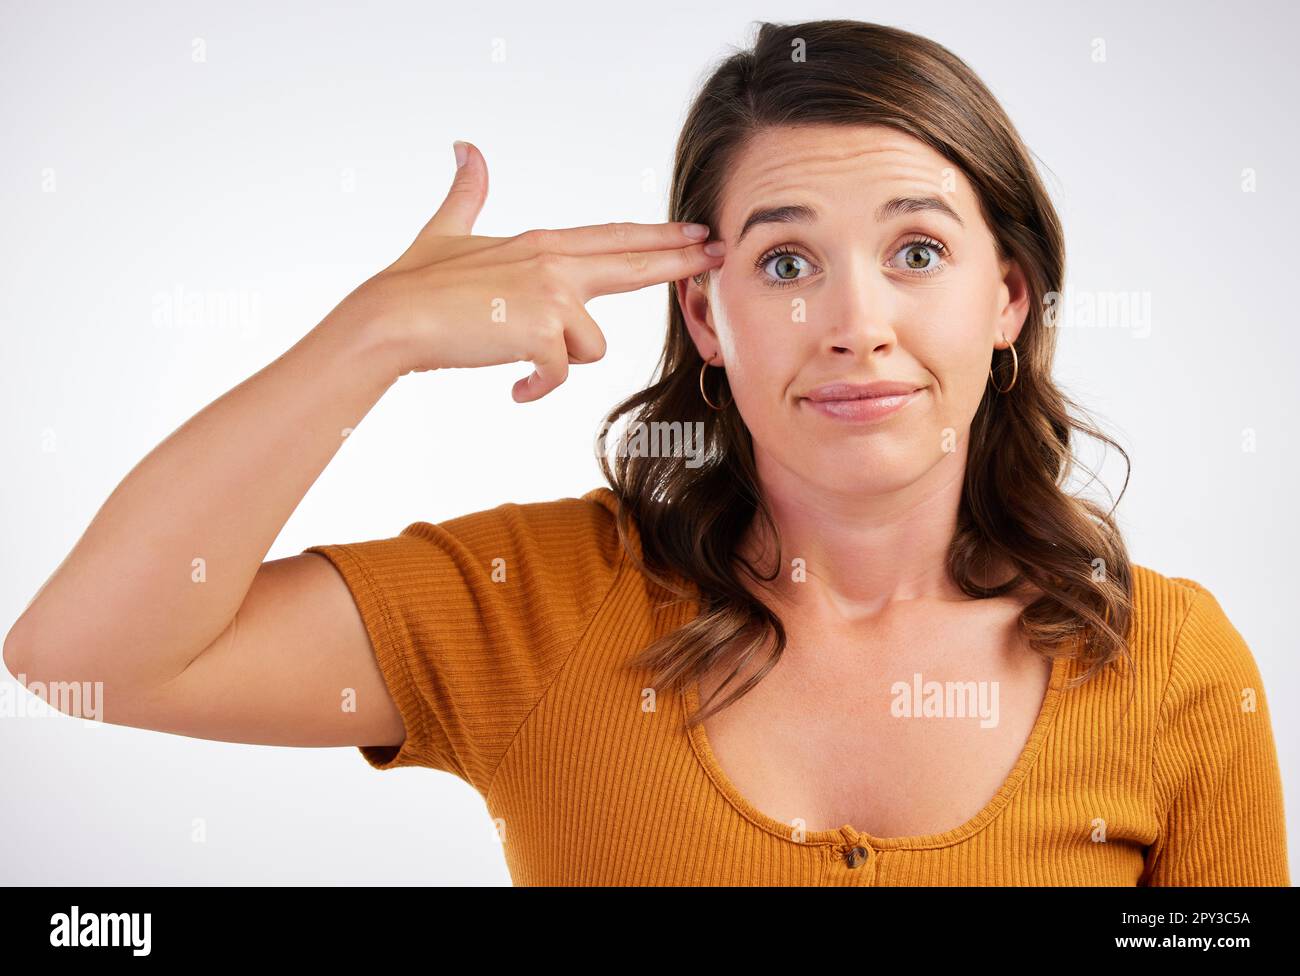 How I feel after a day at work. Studio shot of a young woman making a gun with her hands against a white background. Stock Photo